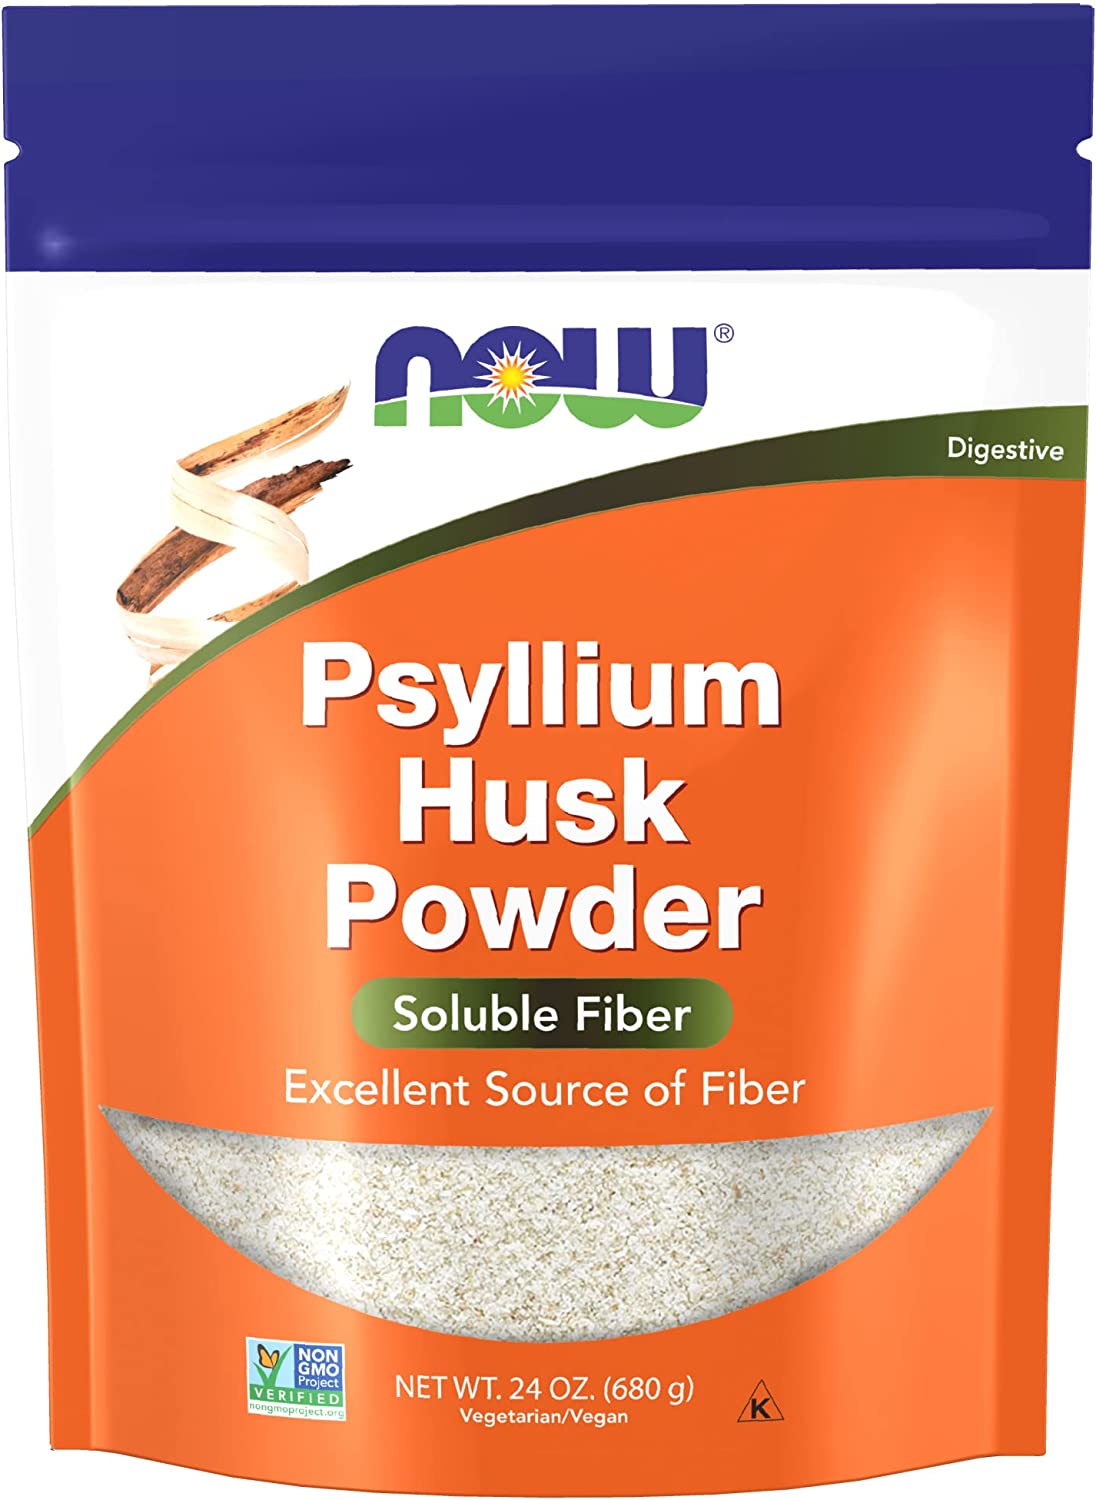 NOW Supplements, Psyllium Husk Powder, Non-GMO Project Verified, Soluble Fiber, 24-Ounce